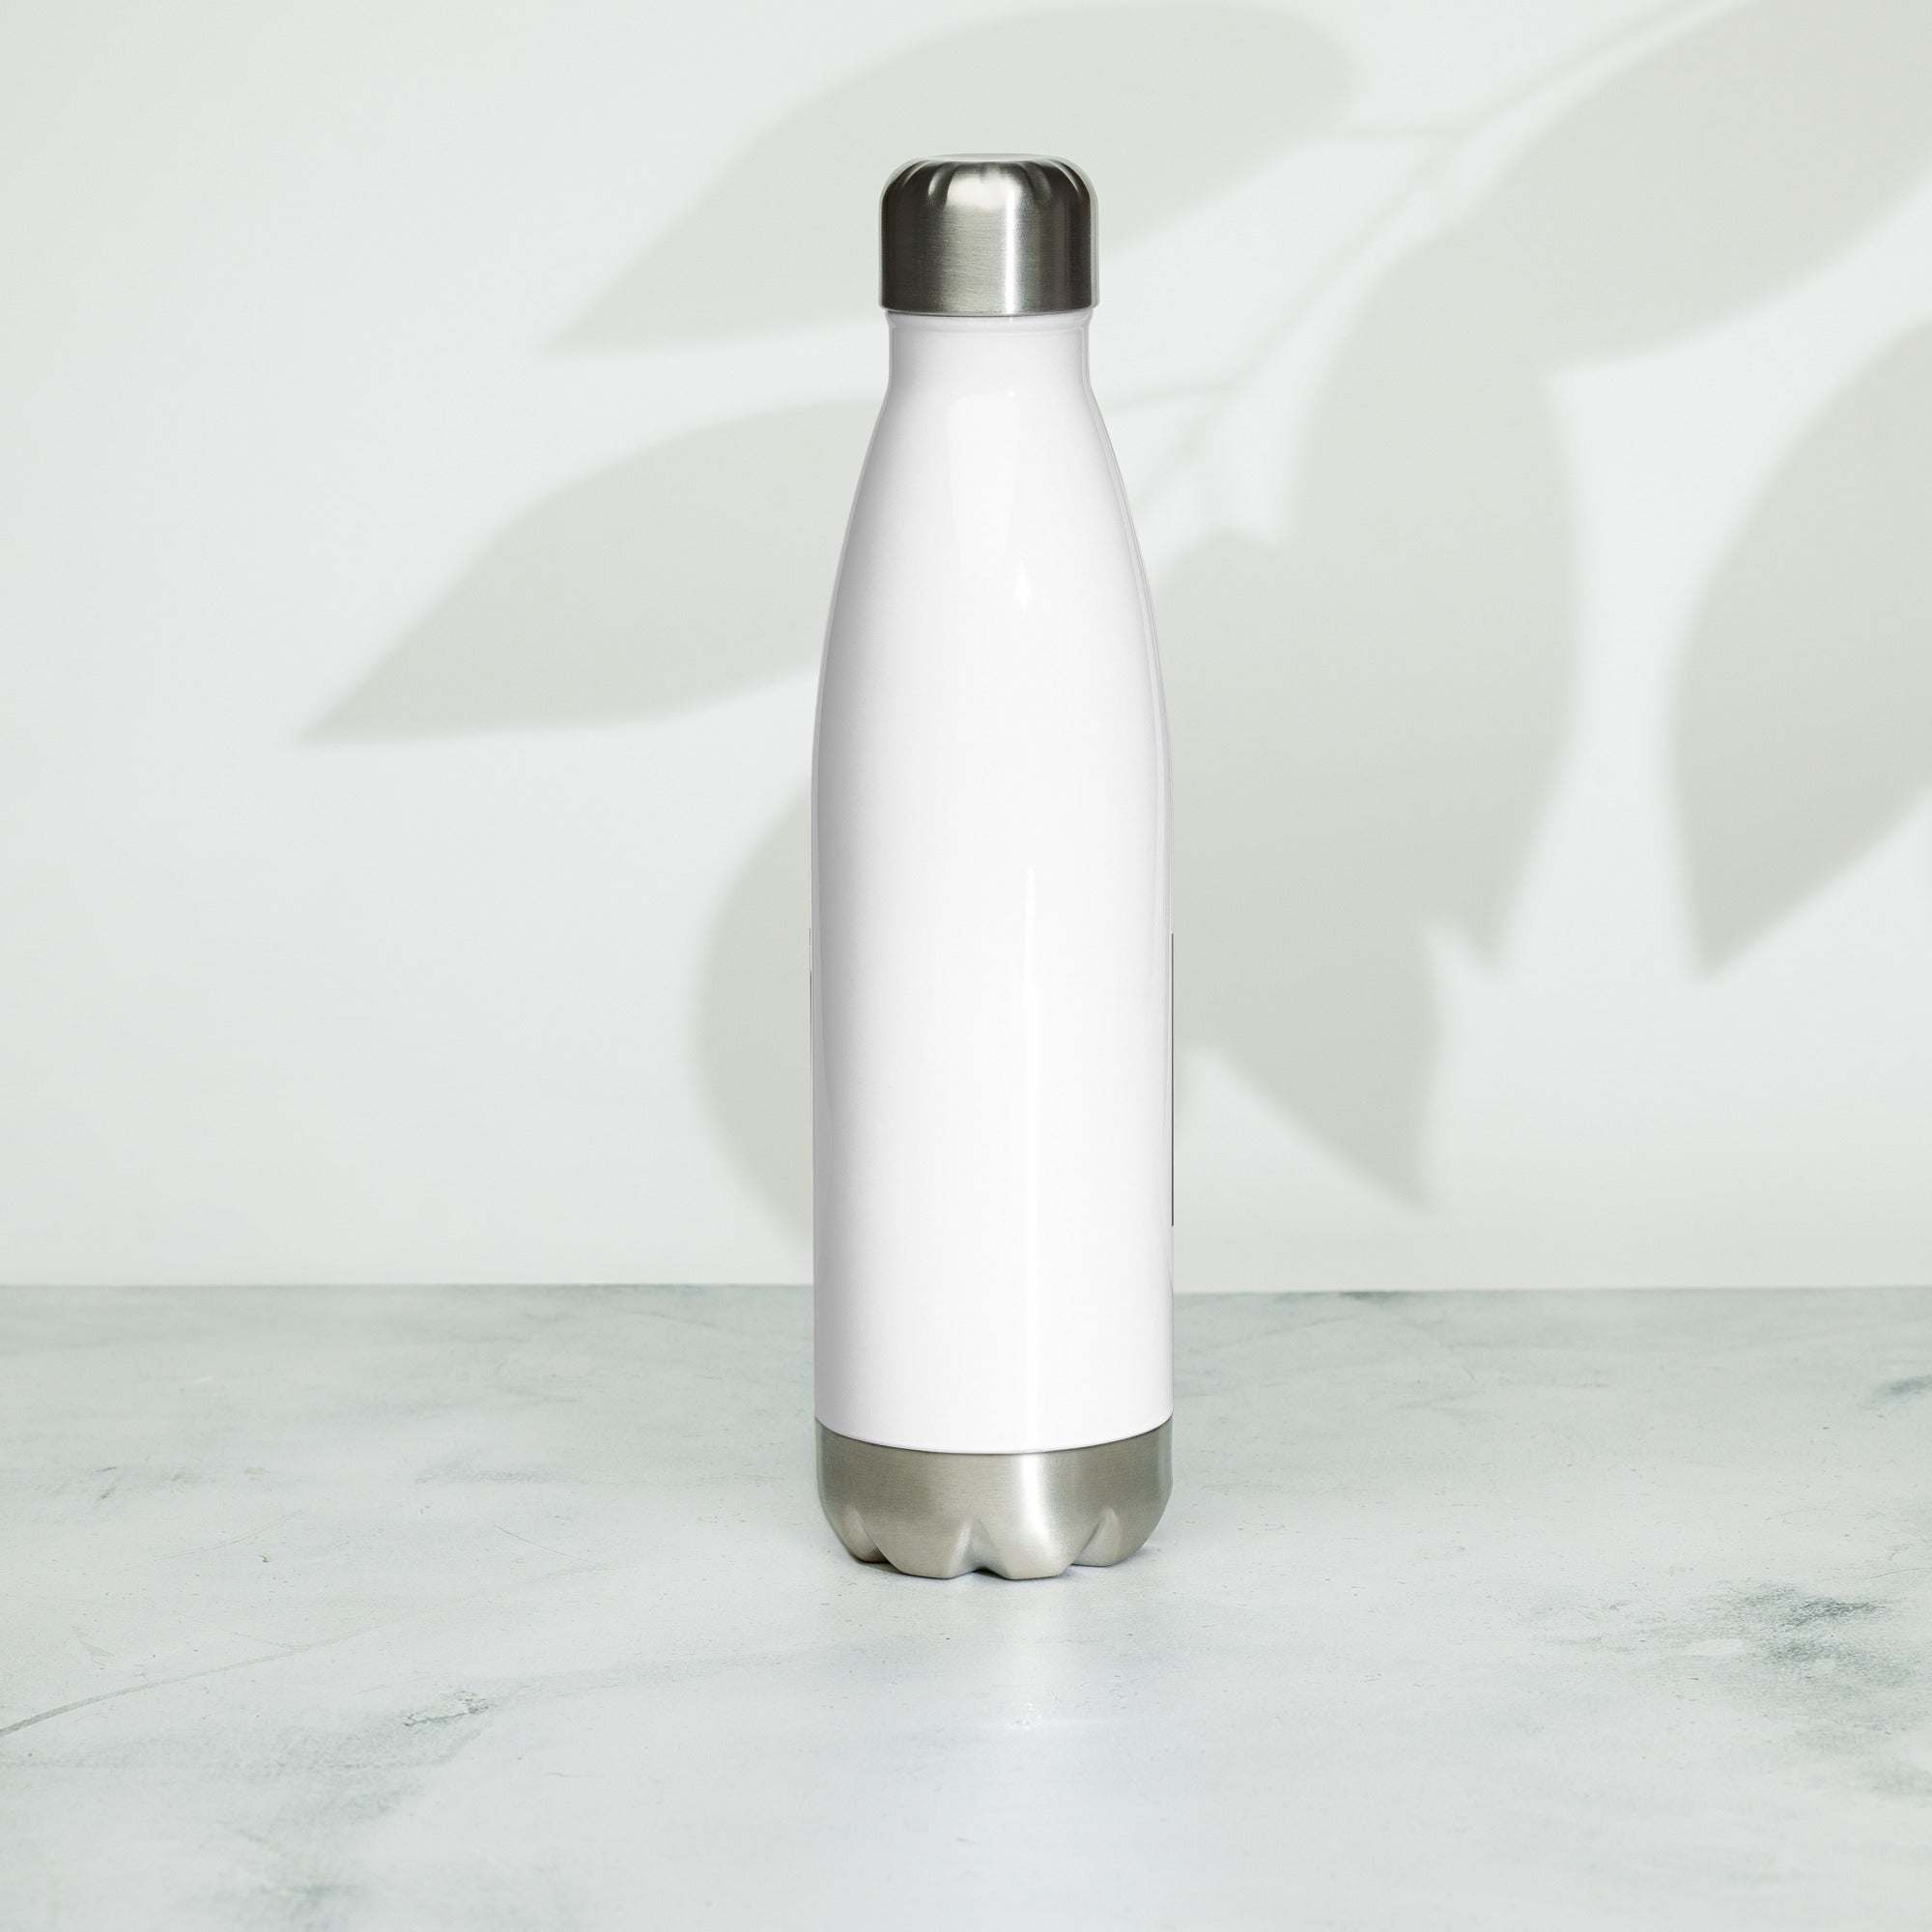 Patched Logo Water Bottle - VET Clothing